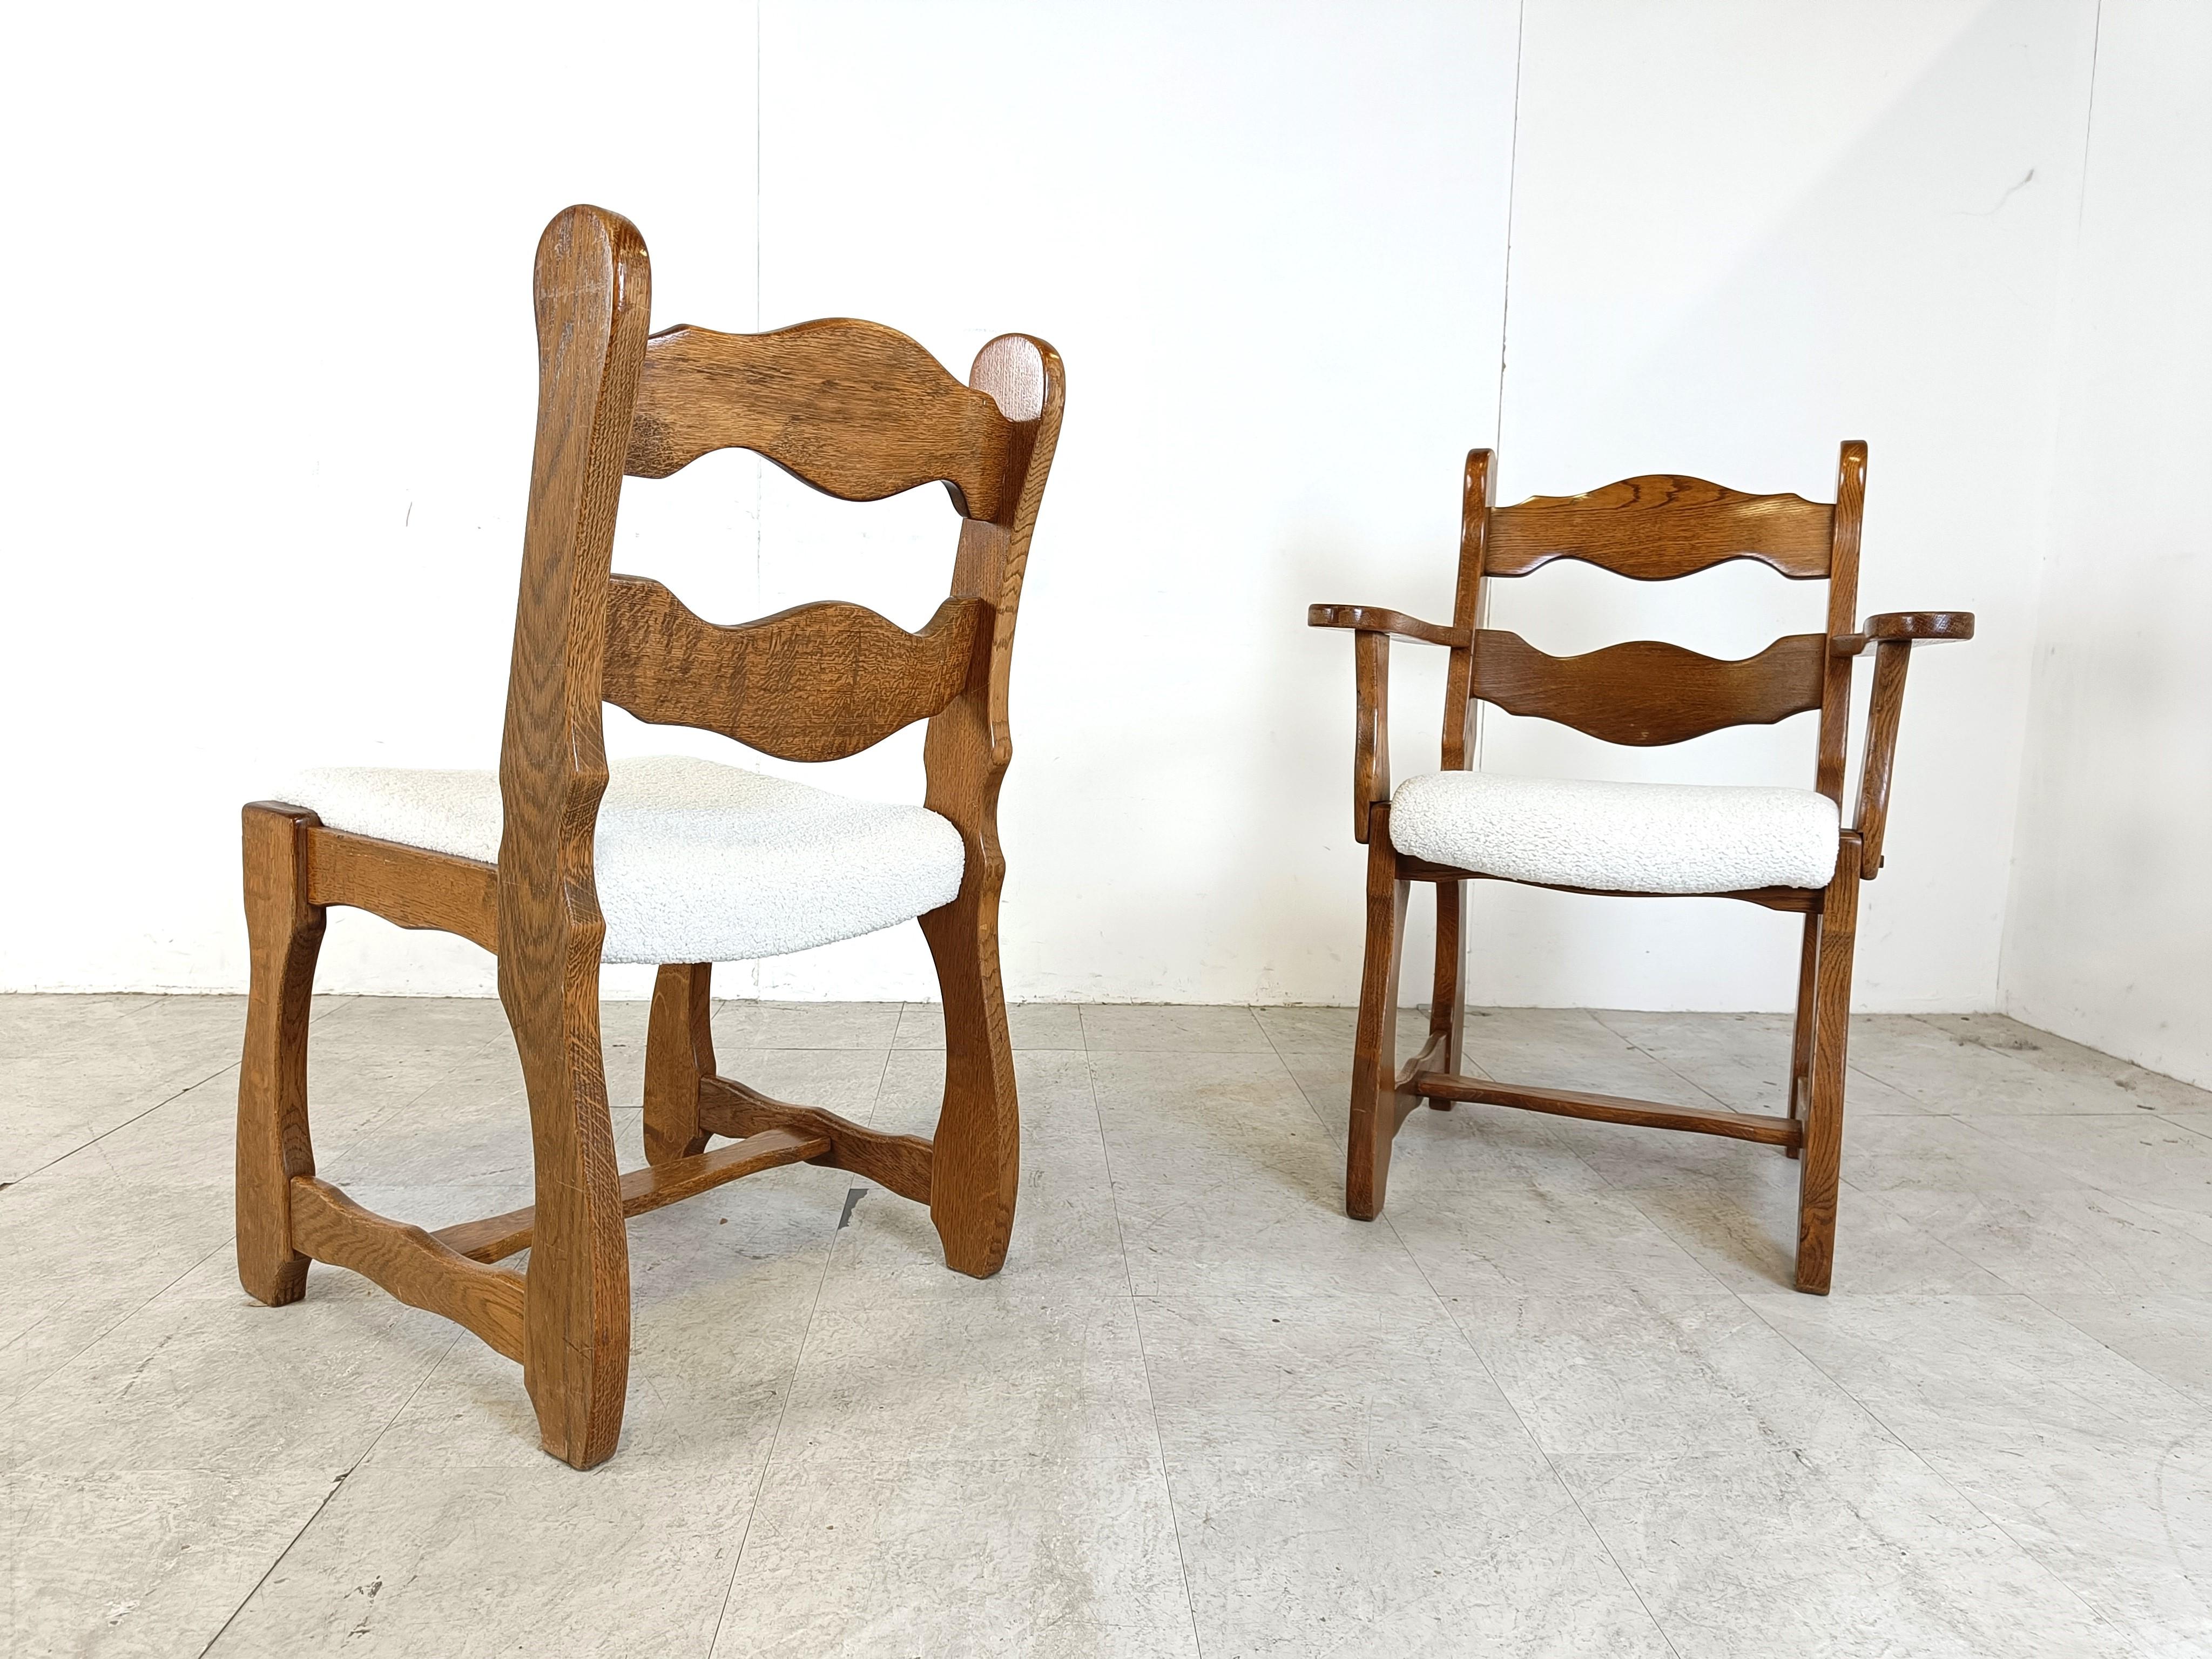 Nicely designed brutalist dining chairs with oak frames and newly upholstered seats in bouclé fabric.

Beautiful, timeless design which is very sturdy as well.

Good original condition.

1960s - Germany

Dimensions:
Height: 92cm/36.22